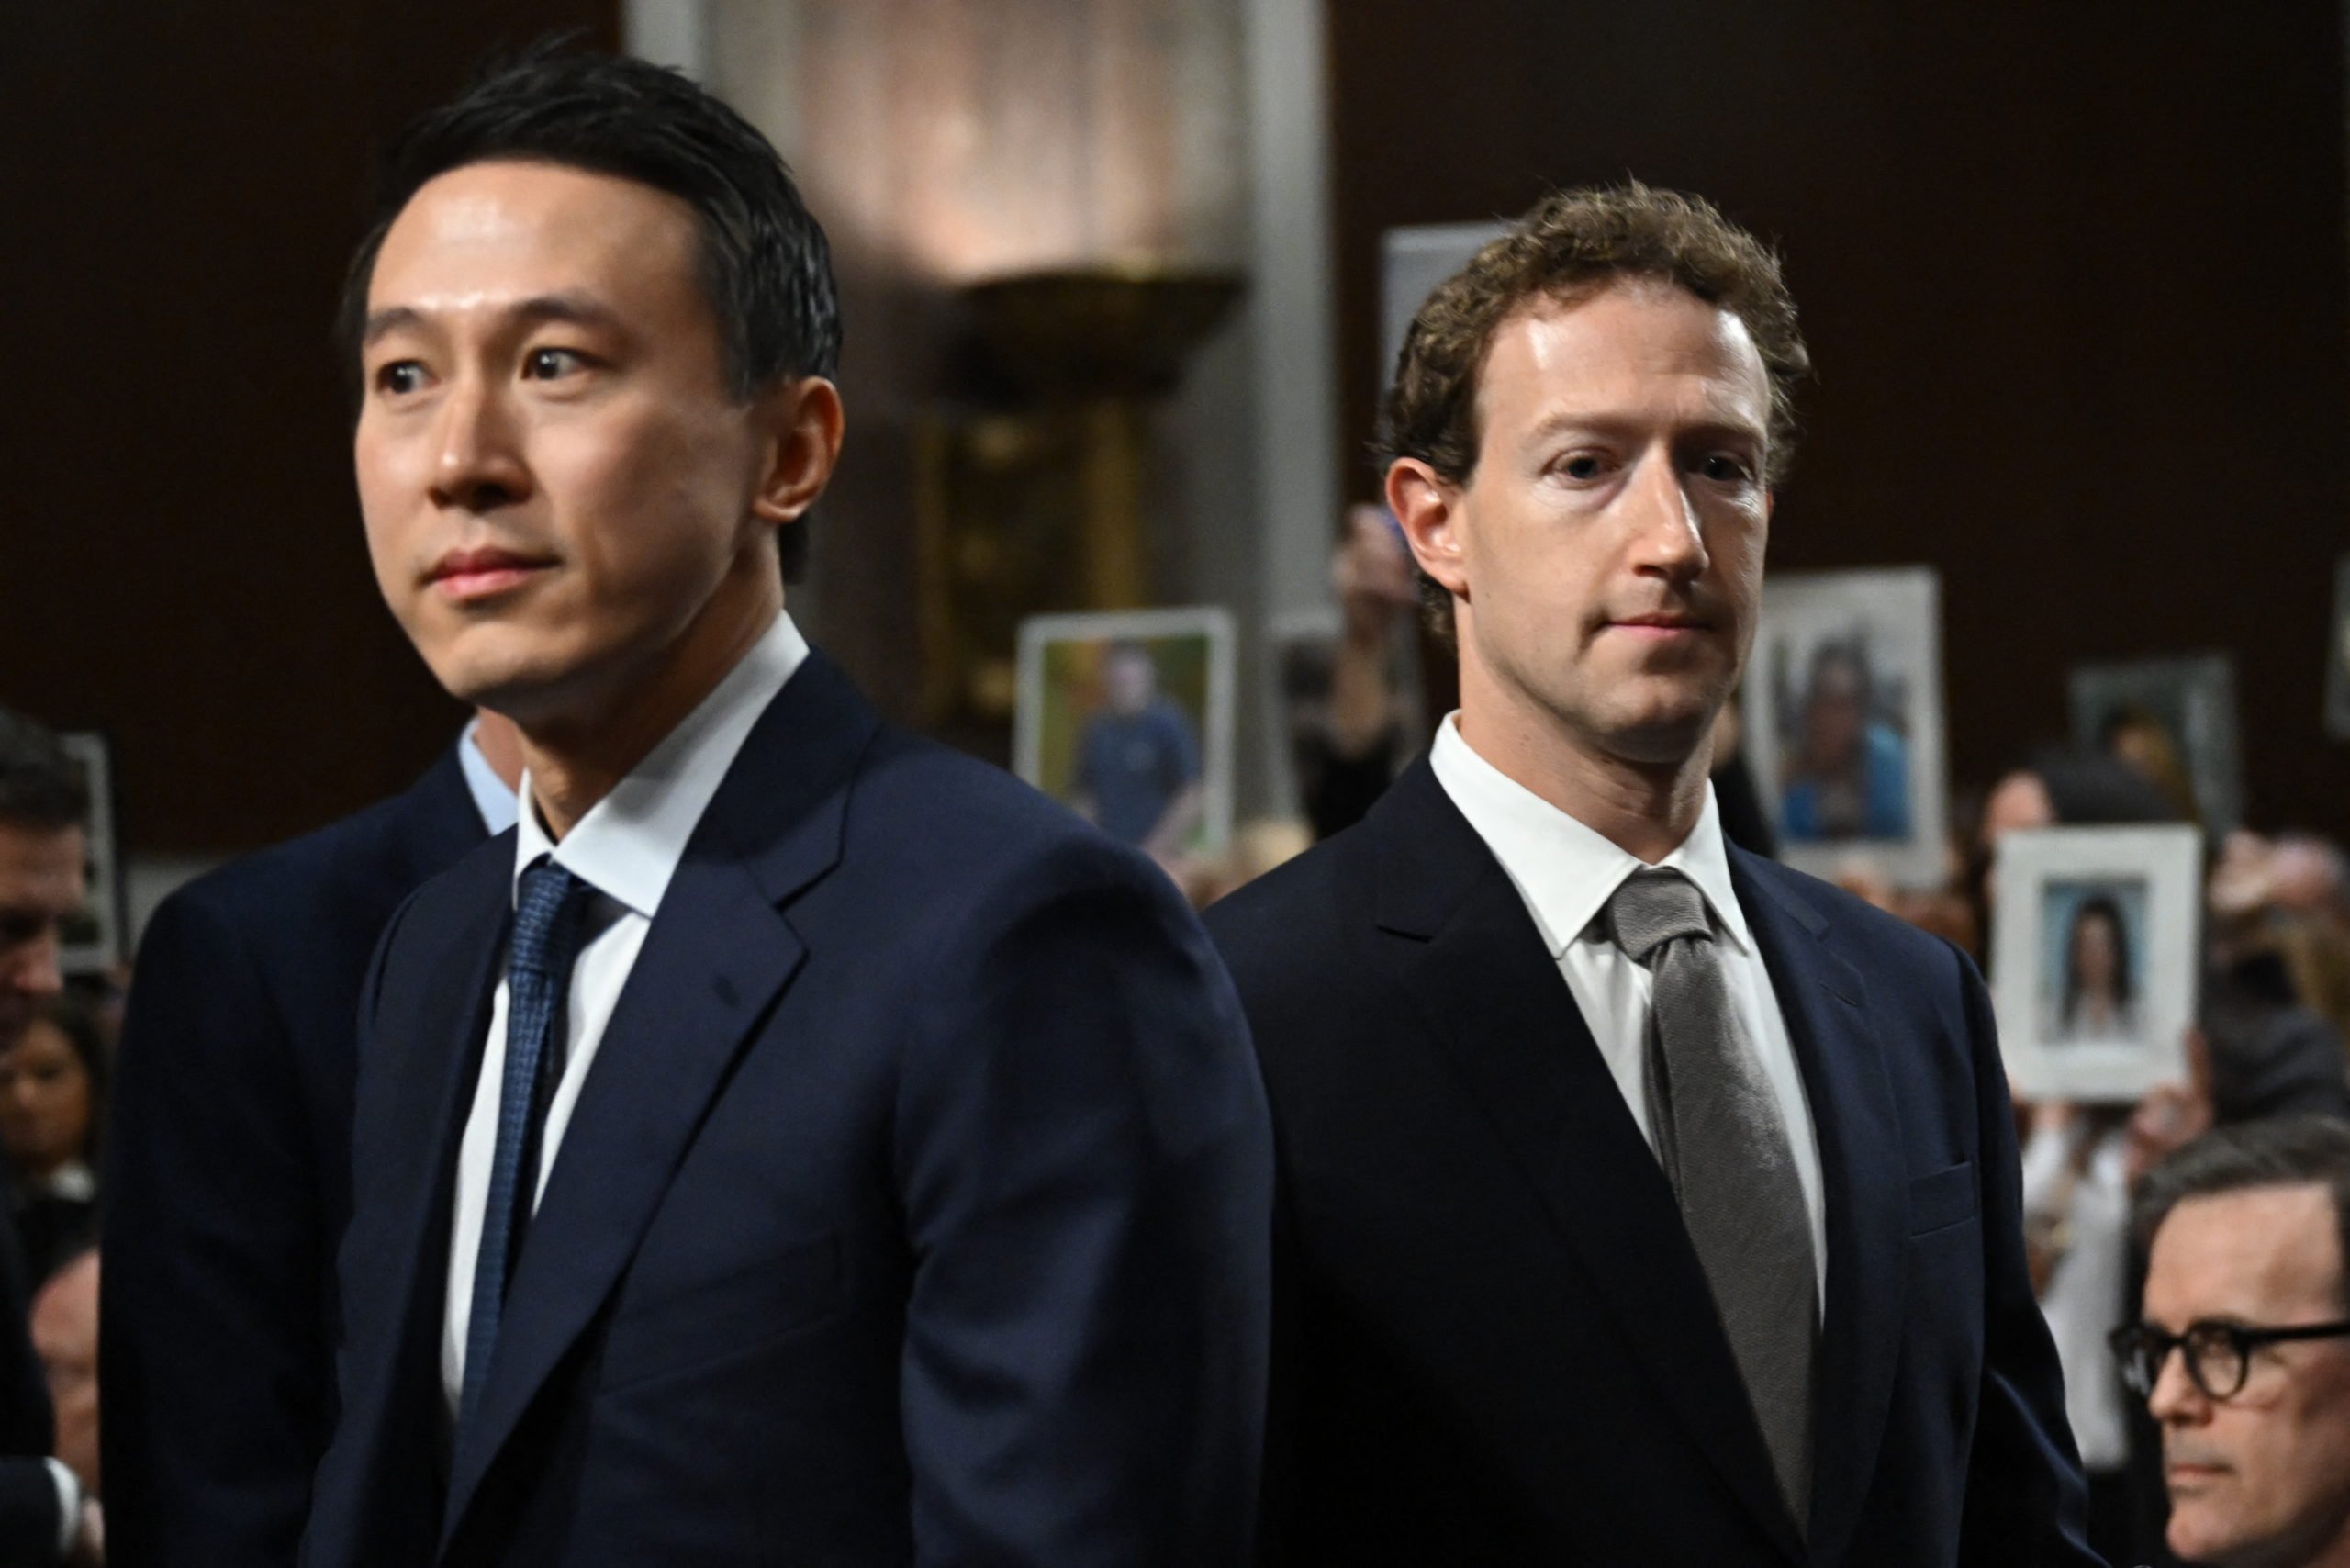 TOPSHOT - (L-R) Shou Zi Chew, CEO of TikTok and Mark Zuckerberg, CEO of Meta, arrive to testify before the US Senate Judiciary Committee hearing, "Big Tech and the Online Child Sexual Exploitation Crisis," in Washington, DC, on January 31, 2024. (Photo by ANDREW CABALLERO-REYNOLDS / AFP) (Photo by ANDREW CABALLERO-REYNOLDS/AFP via Getty Images)